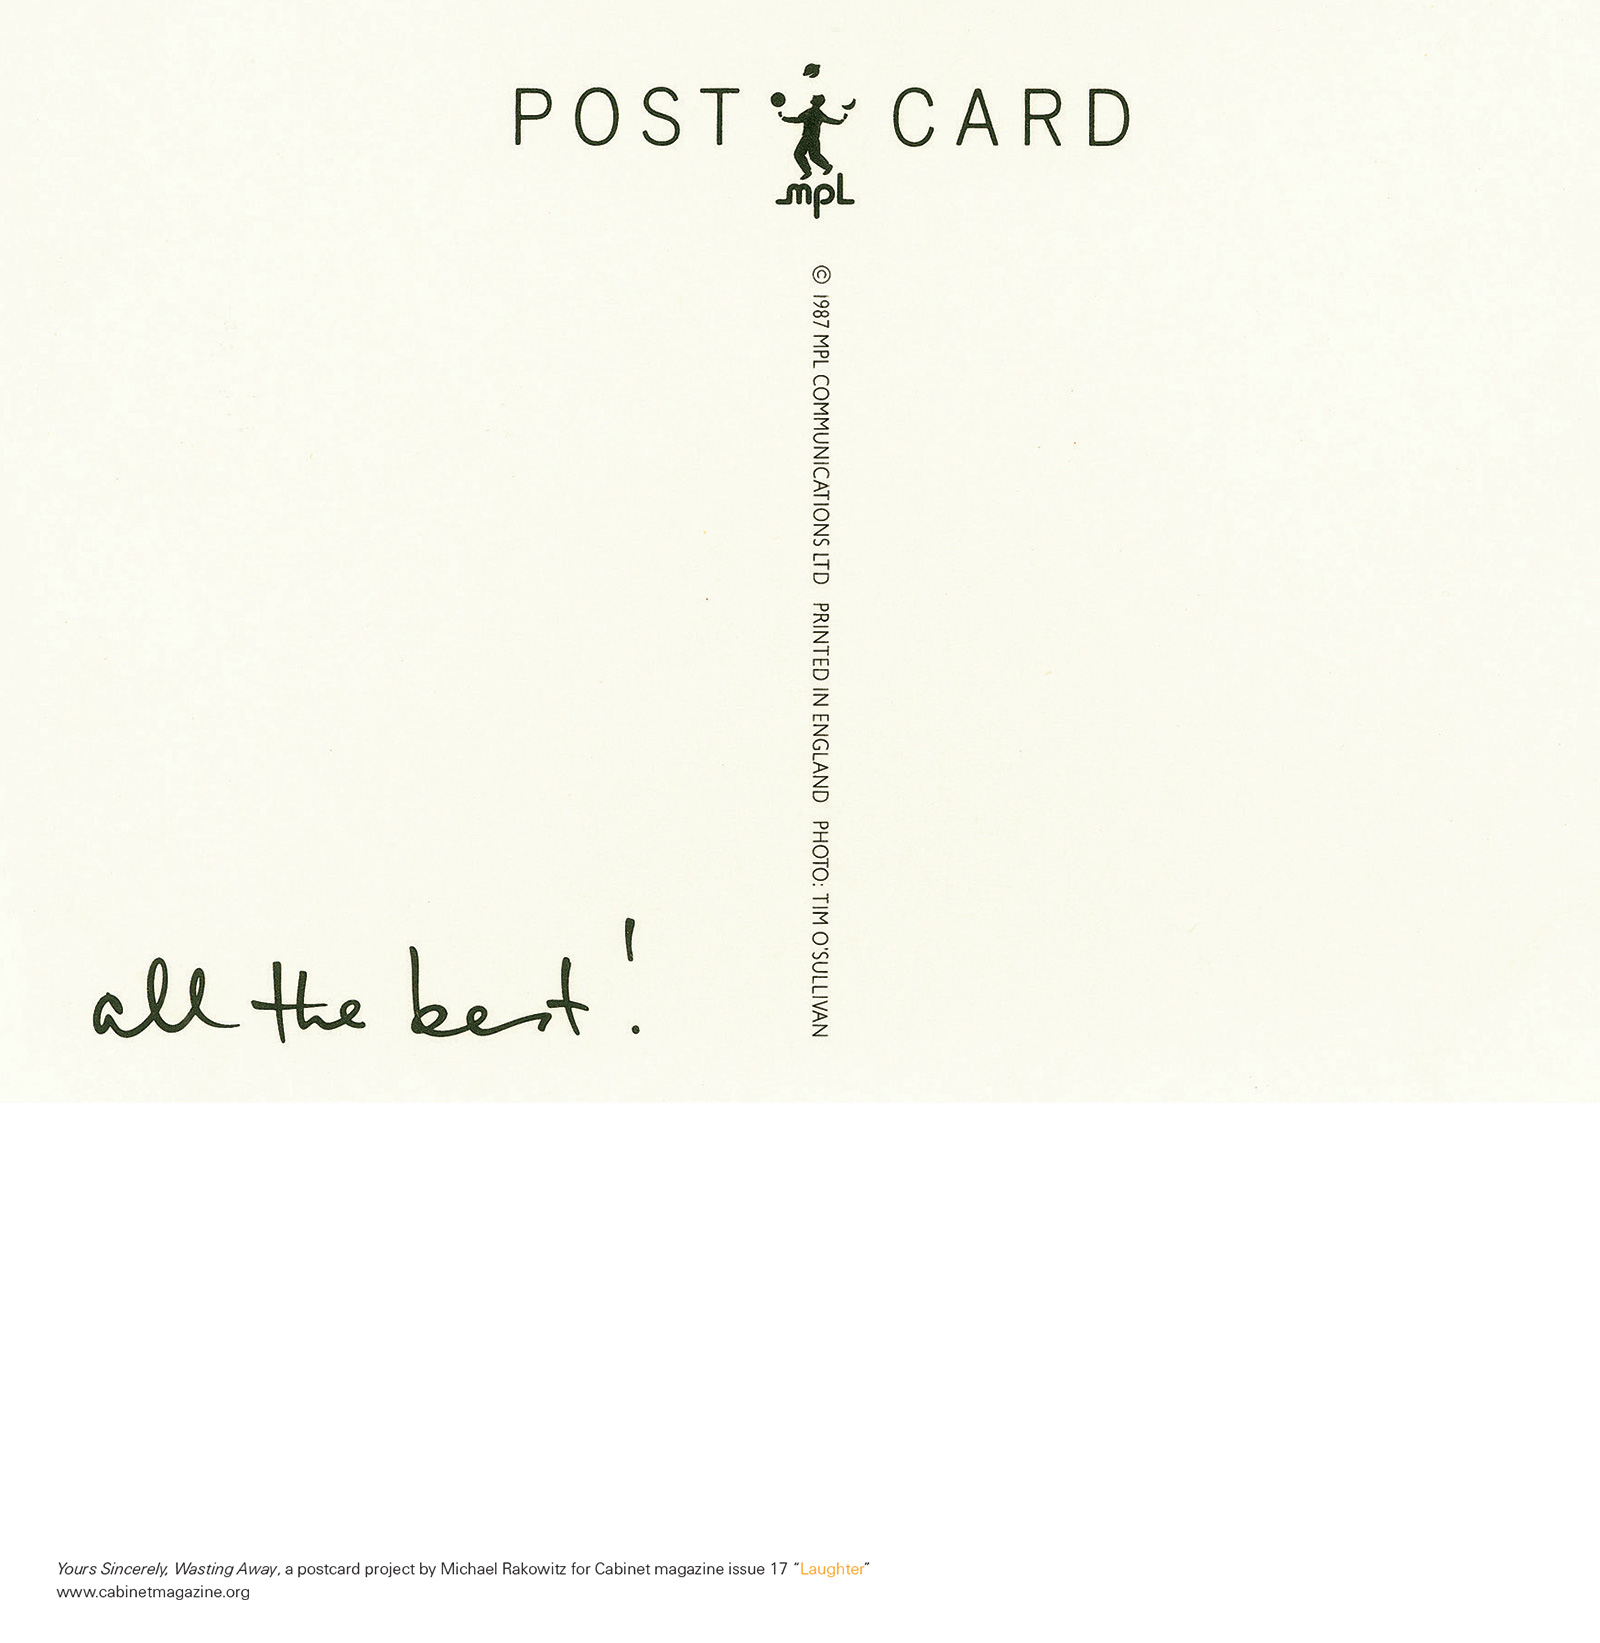 The back of Michael Rakowitz’s original postcard from Paul McCartney on which the singer has written “All the best!”